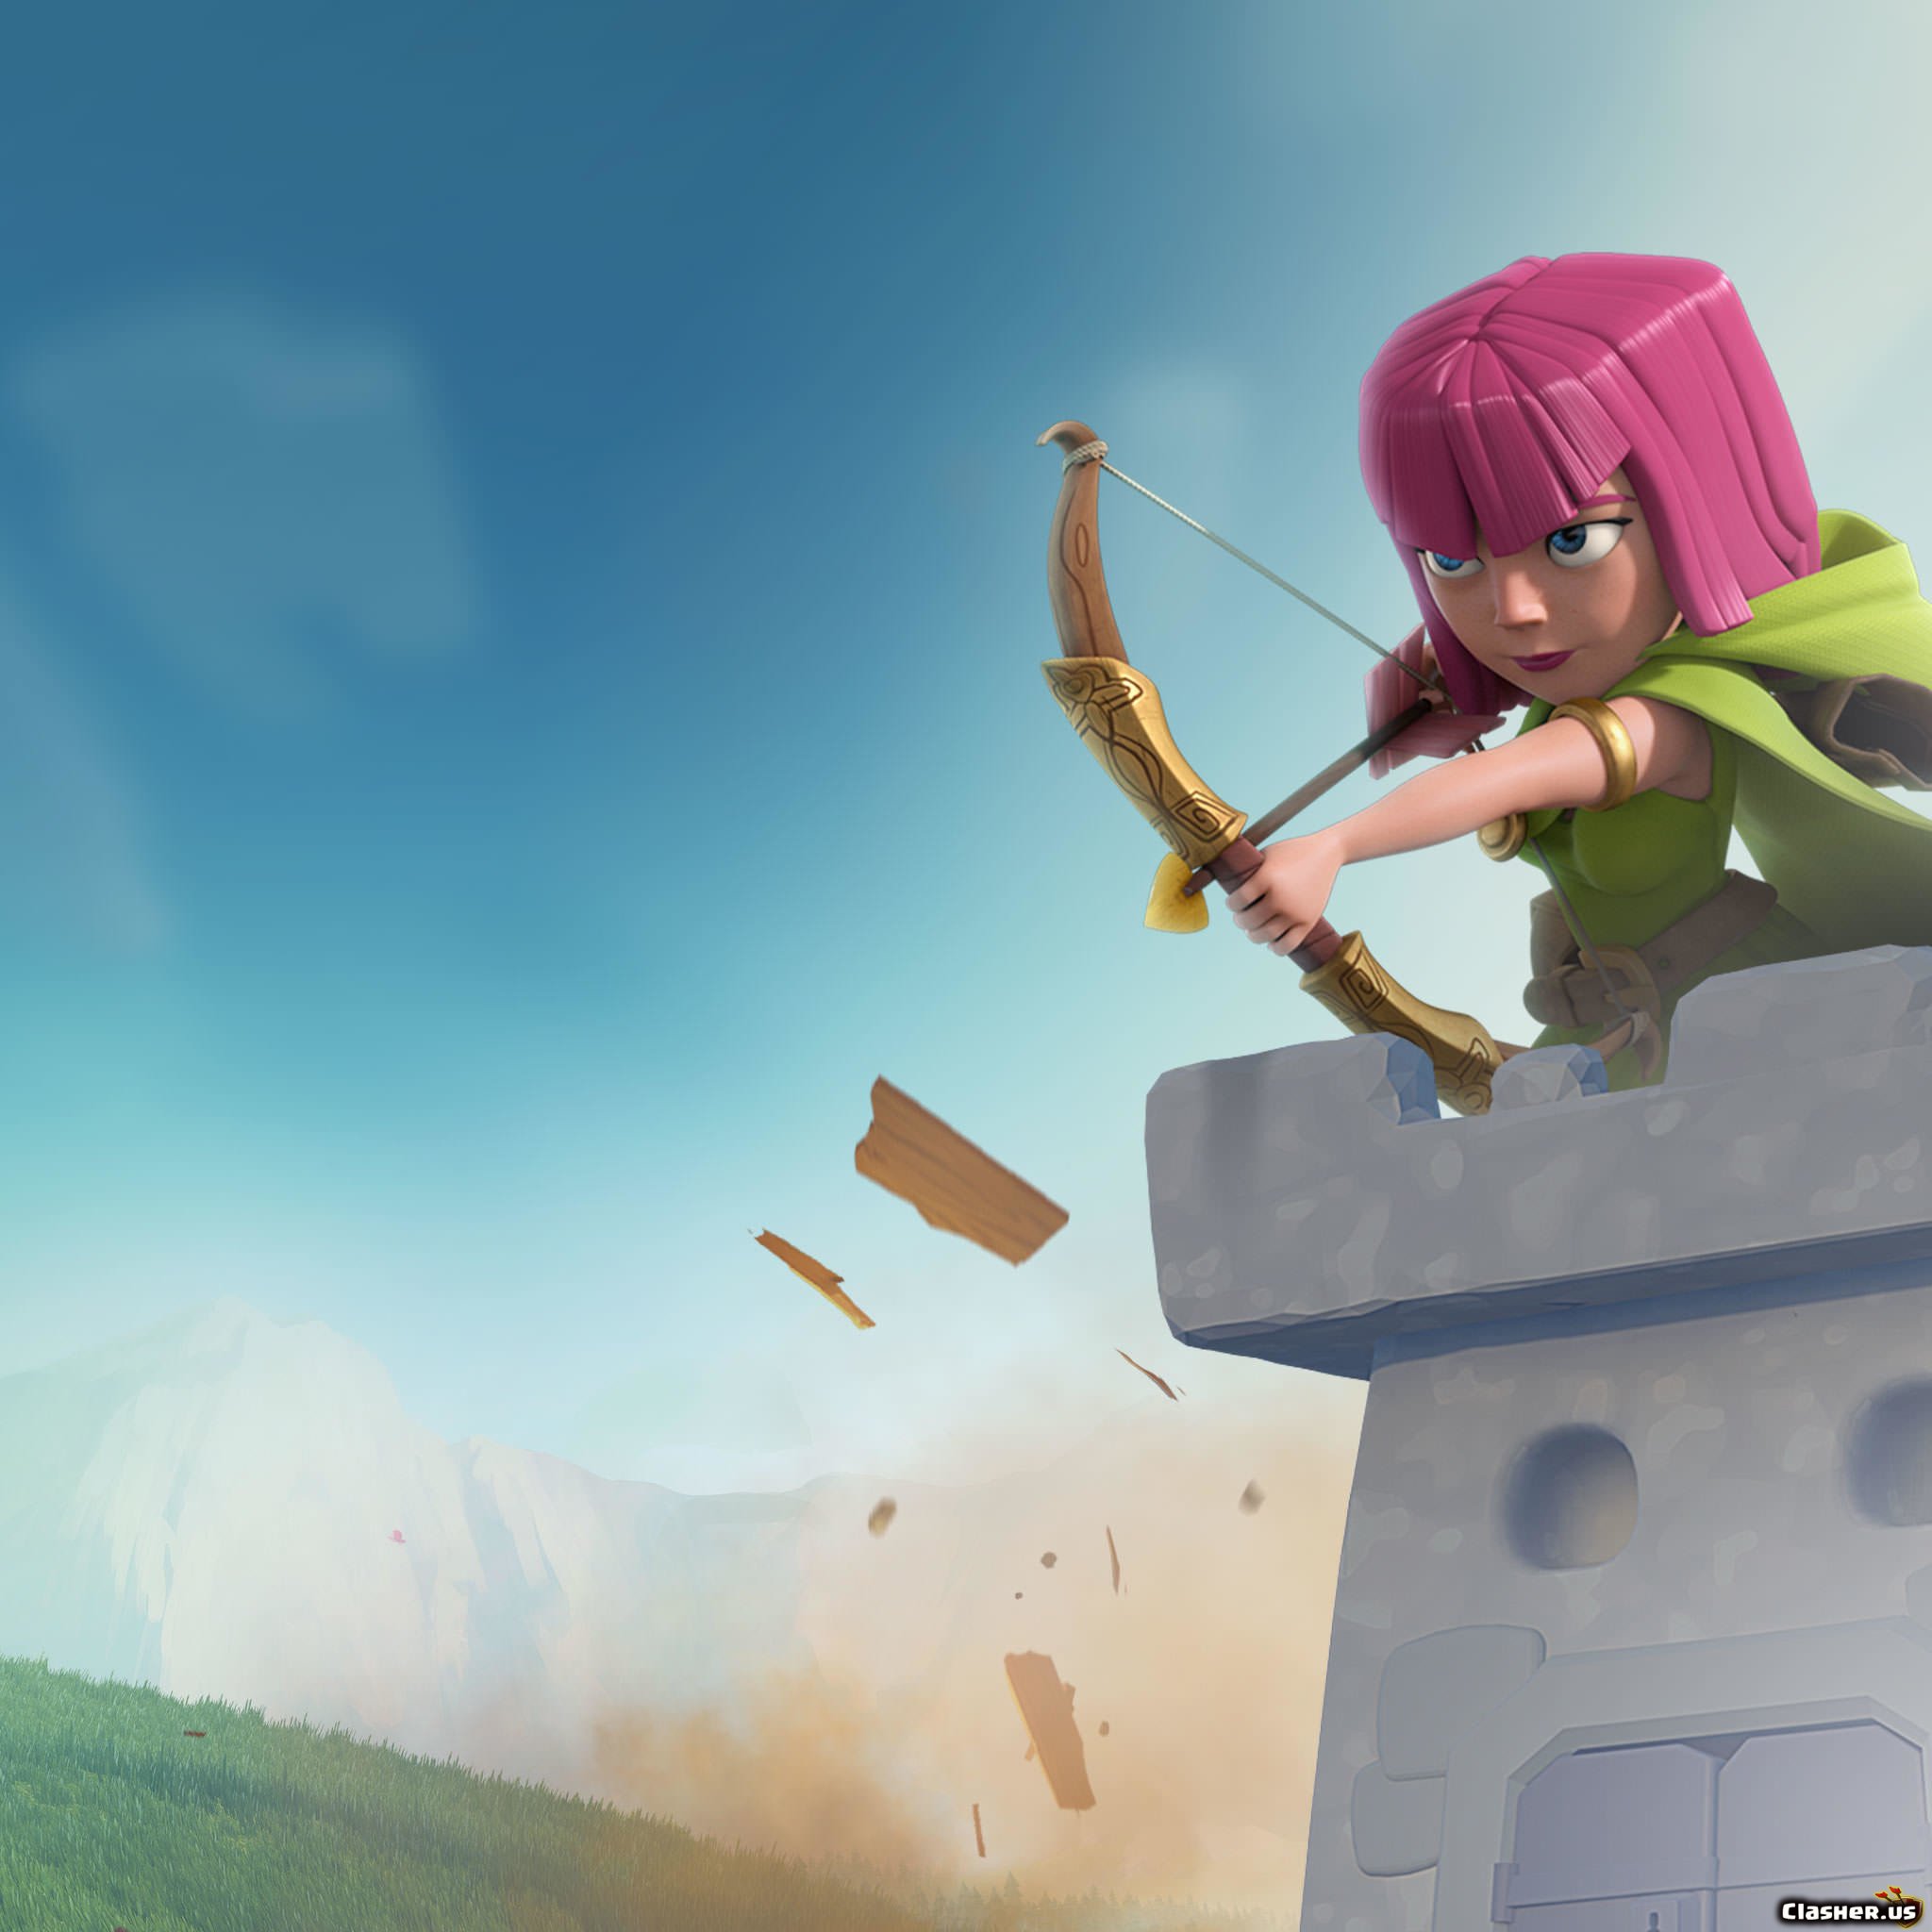 Archer v6 - Clash of Clans Wallpapers | Clasher.us